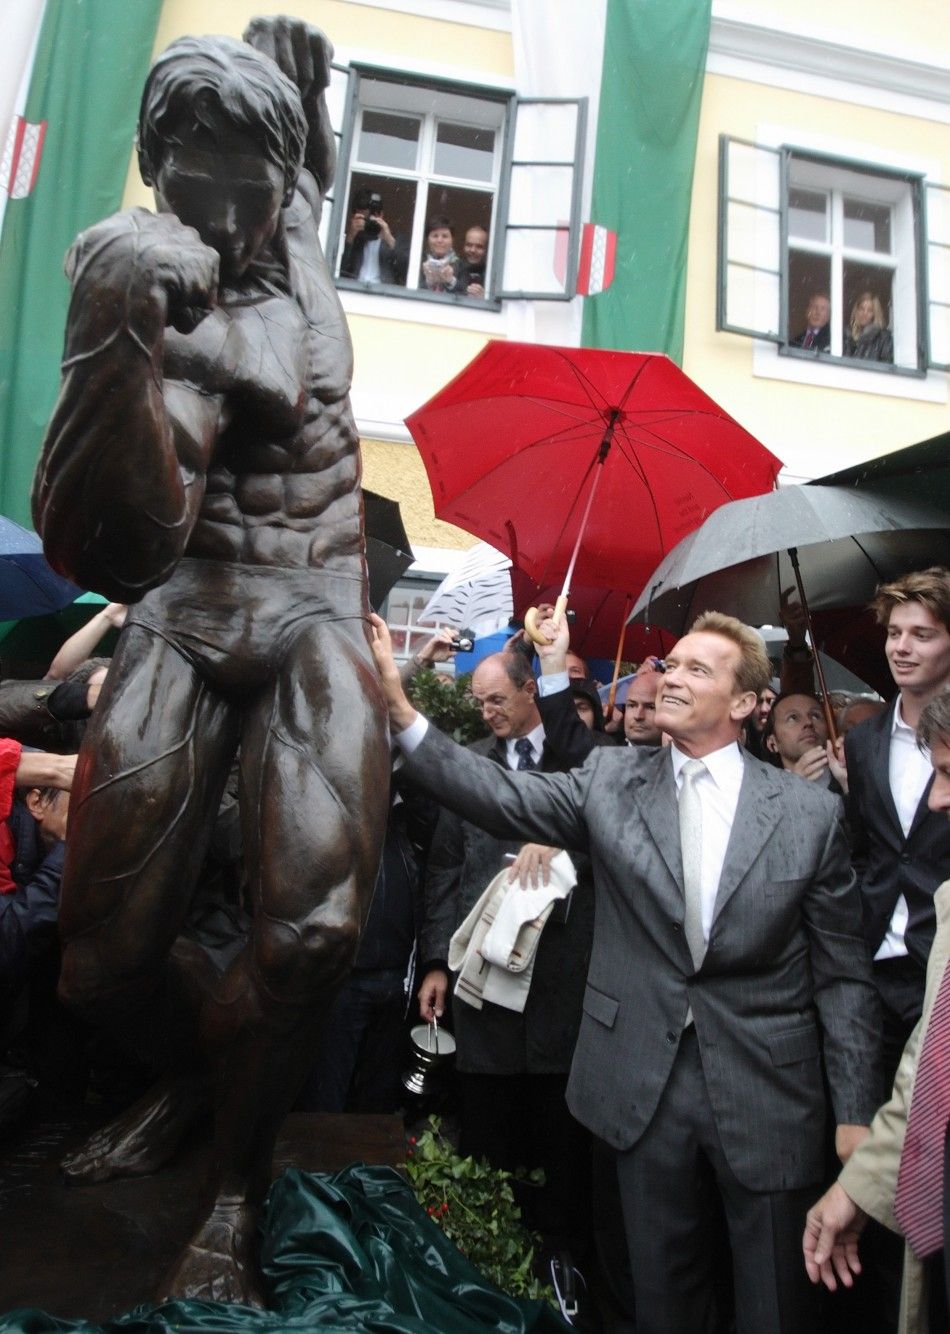 Austrian actor, former champion bodybuilder and former California governor Arnold Schwarzenegger, unveils a statue of himself in a bodybuilding pose as his son Patrick R watches, in Thal 